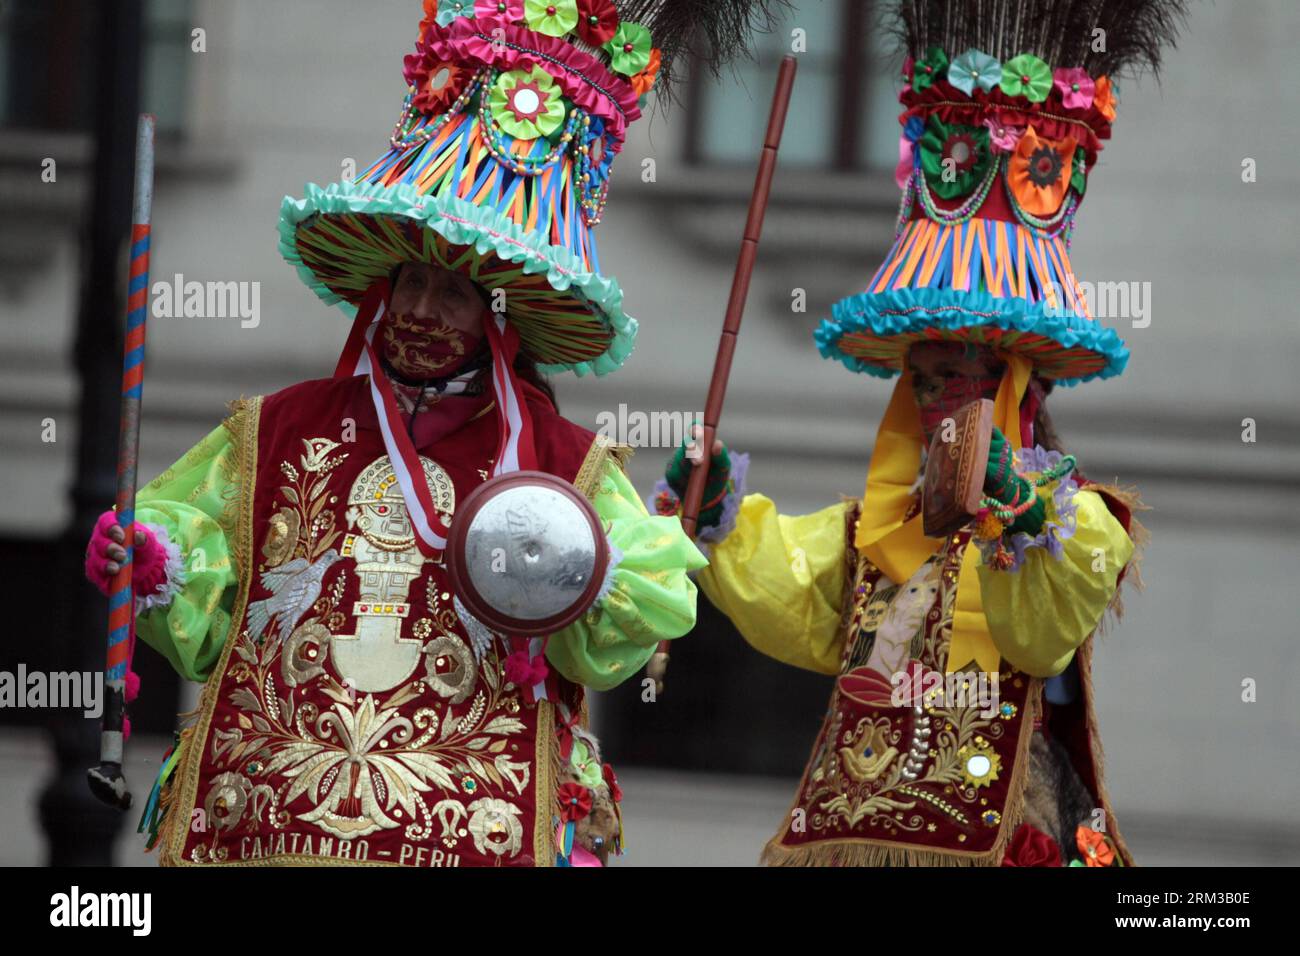 Bildnummer: 60122074  Datum: 13.07.2013  Copyright: imago/Xinhua LIMA, July 13, 2013 - Image provided by Peru s Presidency shows two dancers performing during a presentation for the Santa Maria Magdalena de Cajatambo festivity, in the framework of the Palace for Everybody program, at the Government s Palace in Lima, capital of Peru, on July 13, 2013. Cajatambo, a north province of Lima s district, celebrates the Festivity of Santa Maria Magdalena each year with artistics representations that show the zone folklore. (Xinhua/Peru s Presidency) (rt) (syq) PERU-LIMA-FESTIVITY PUBLICATIONxNOTxINxCH Stock Photo